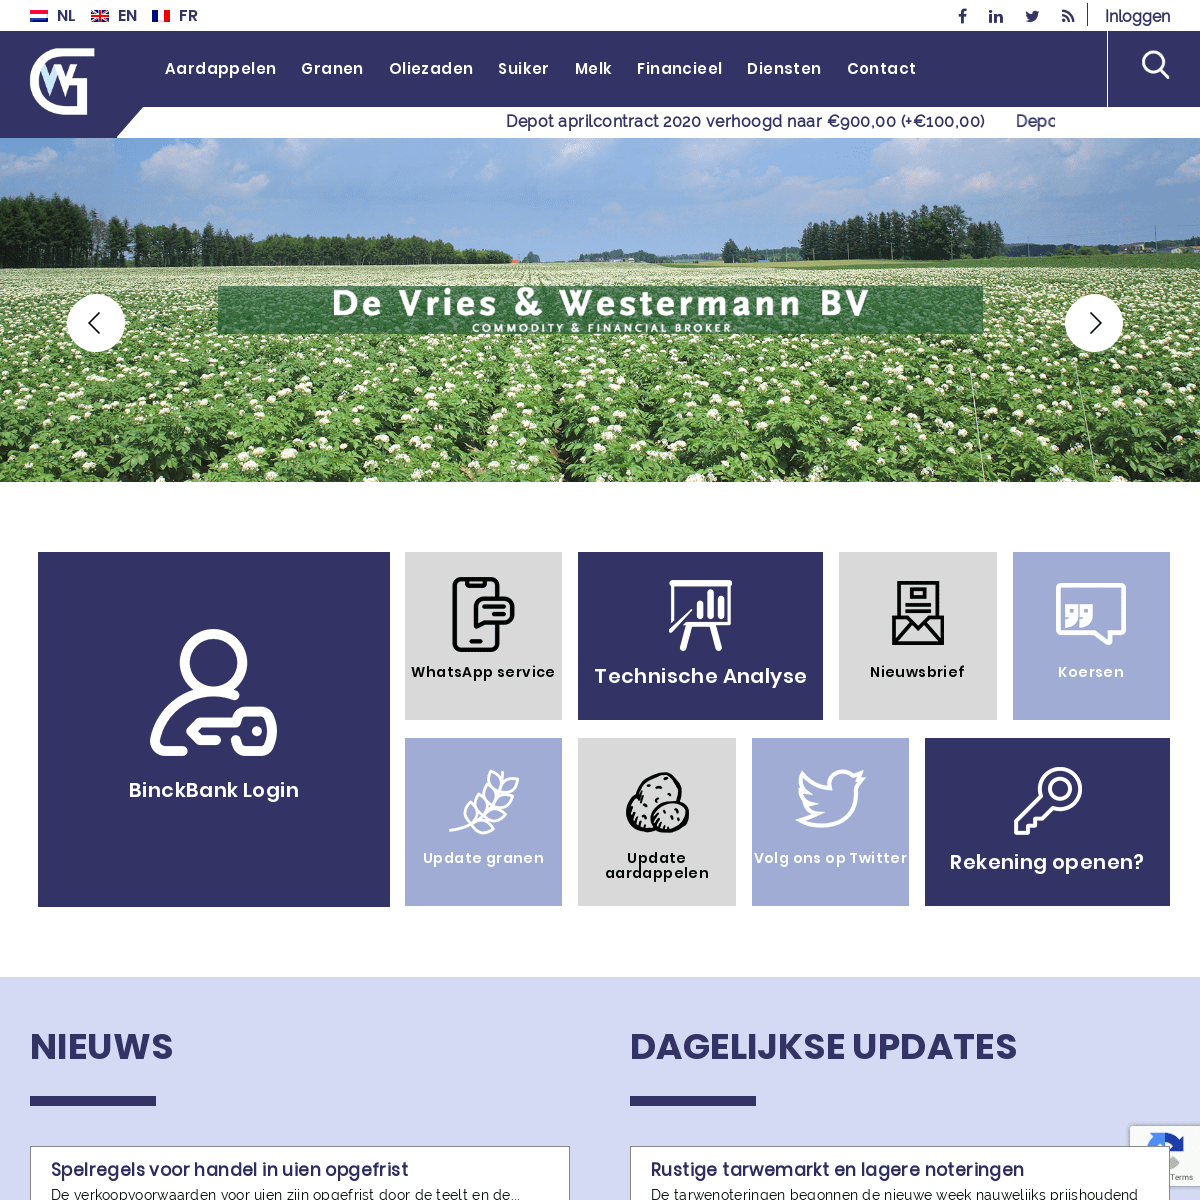 A complete backup of agrifutures.nl